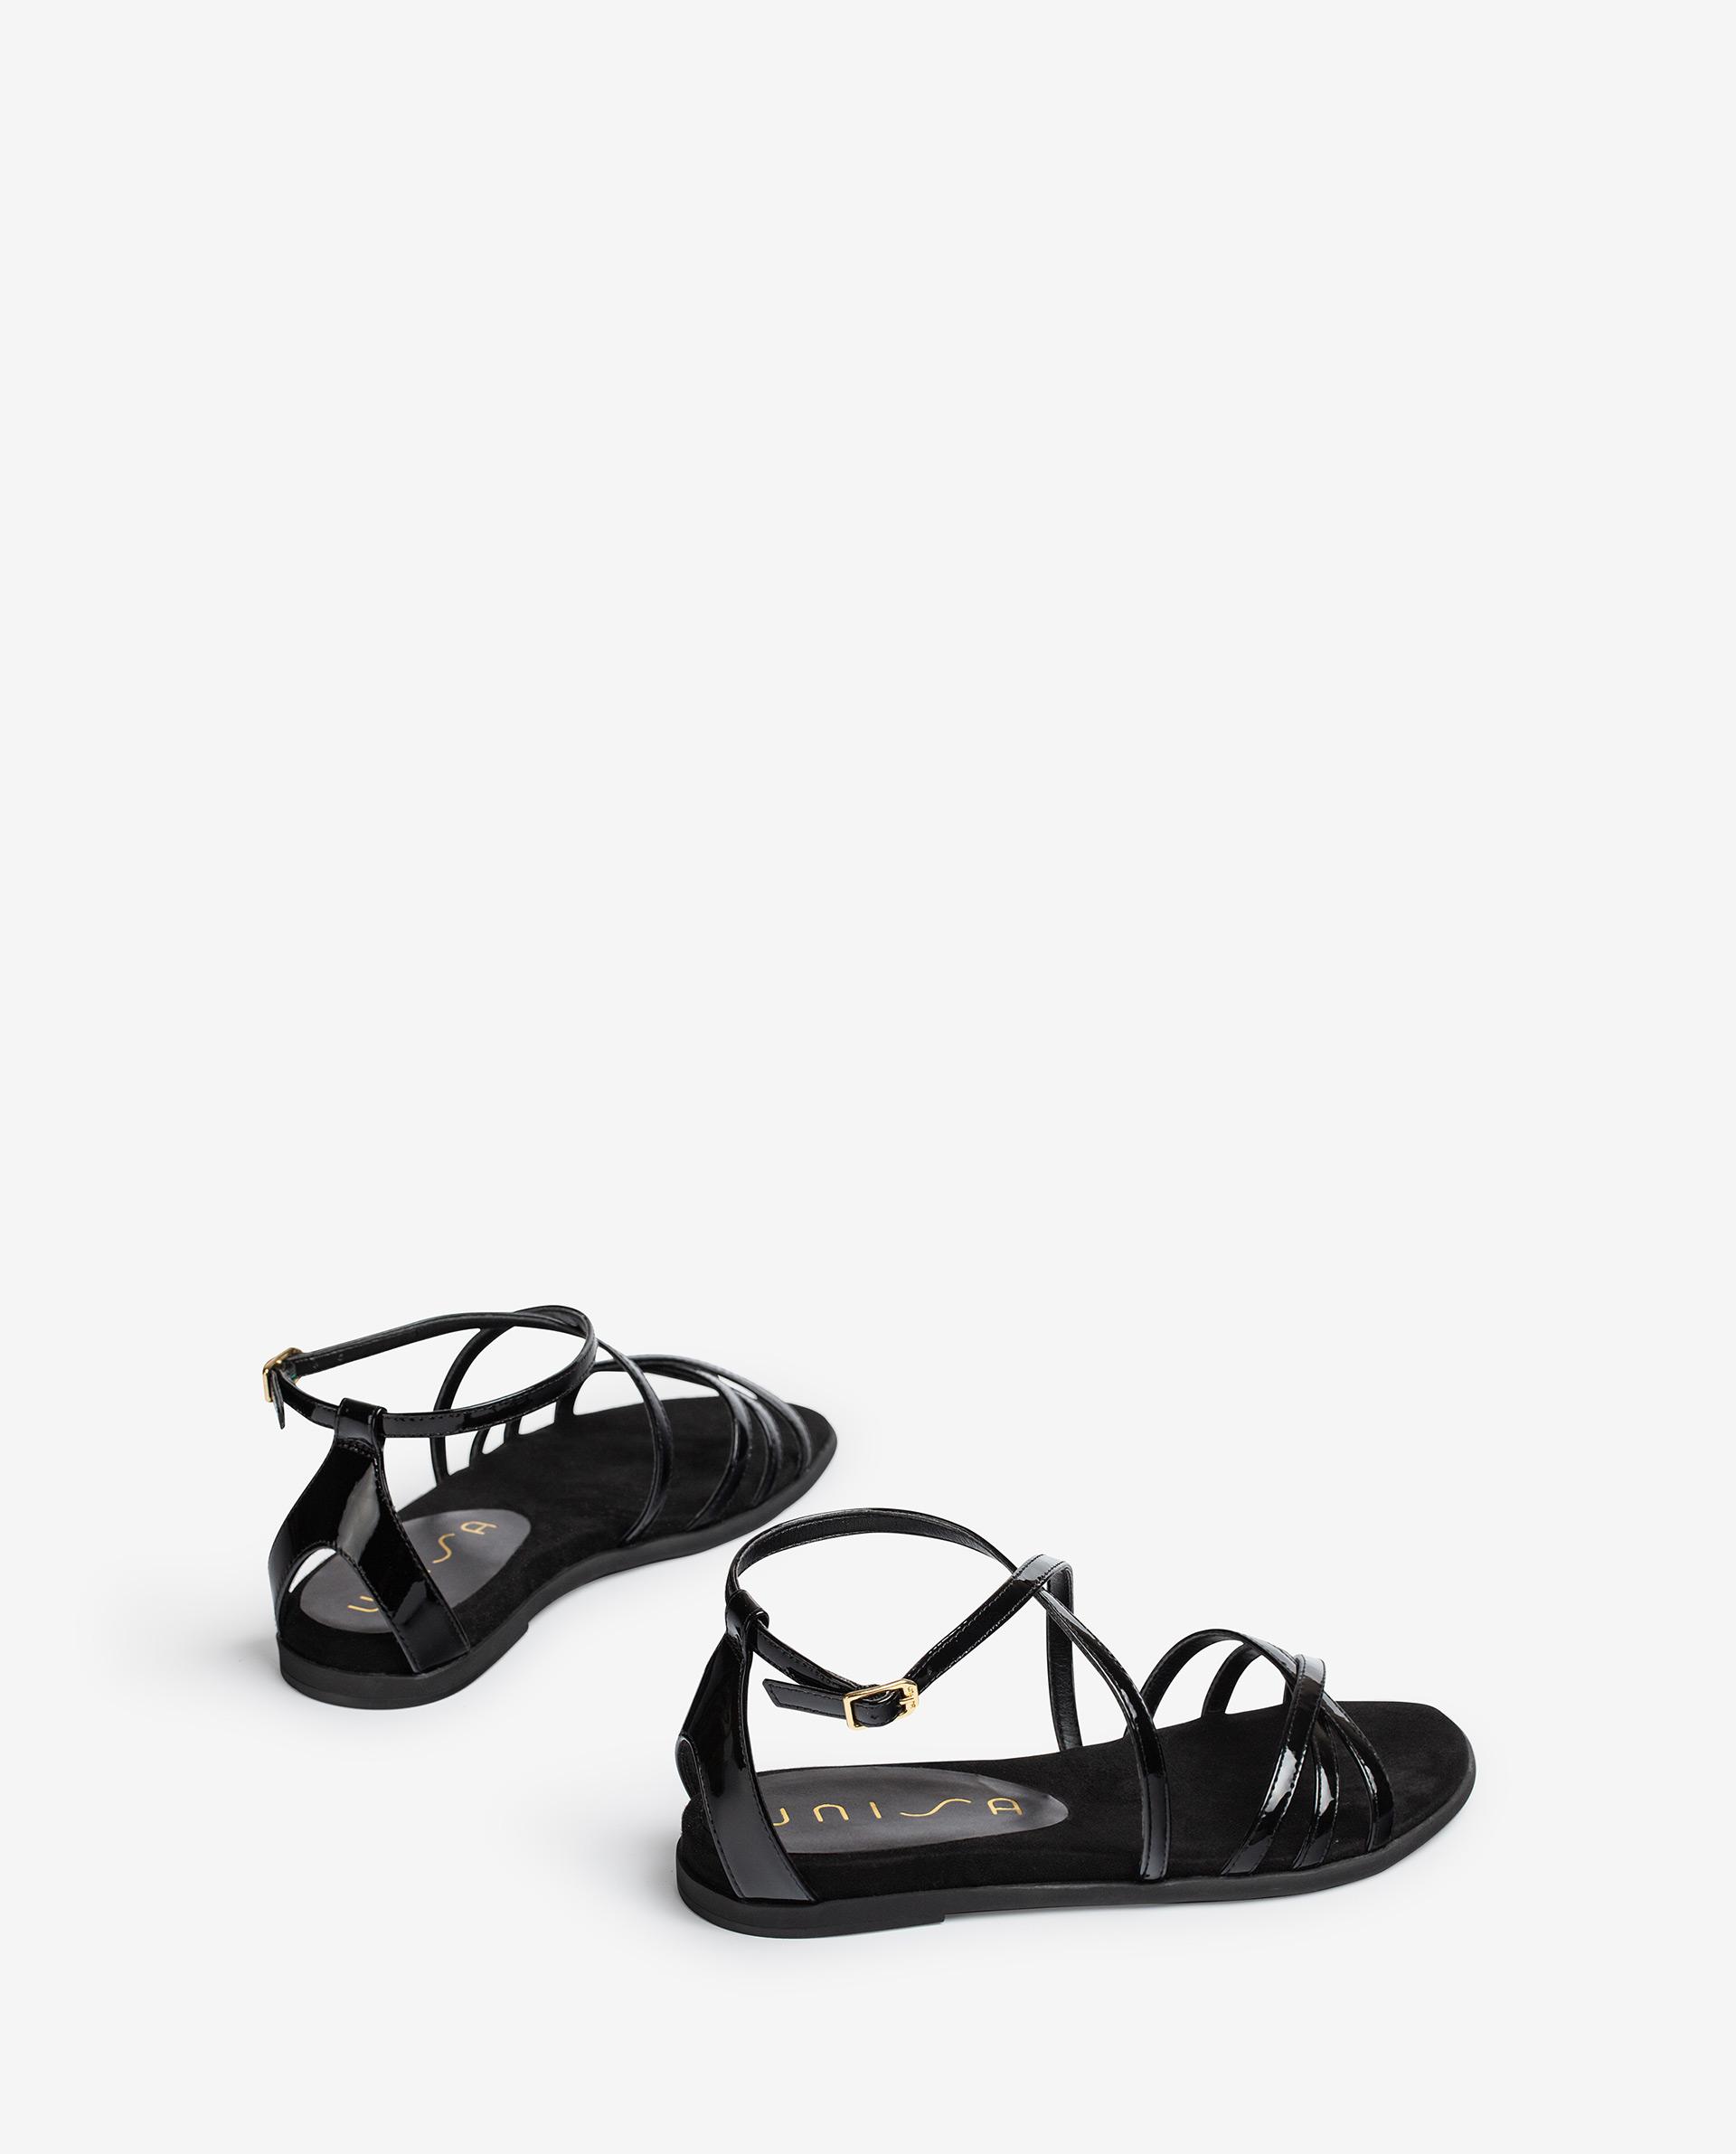 UNISA Patent leather flat sandals CARCER_PA 2